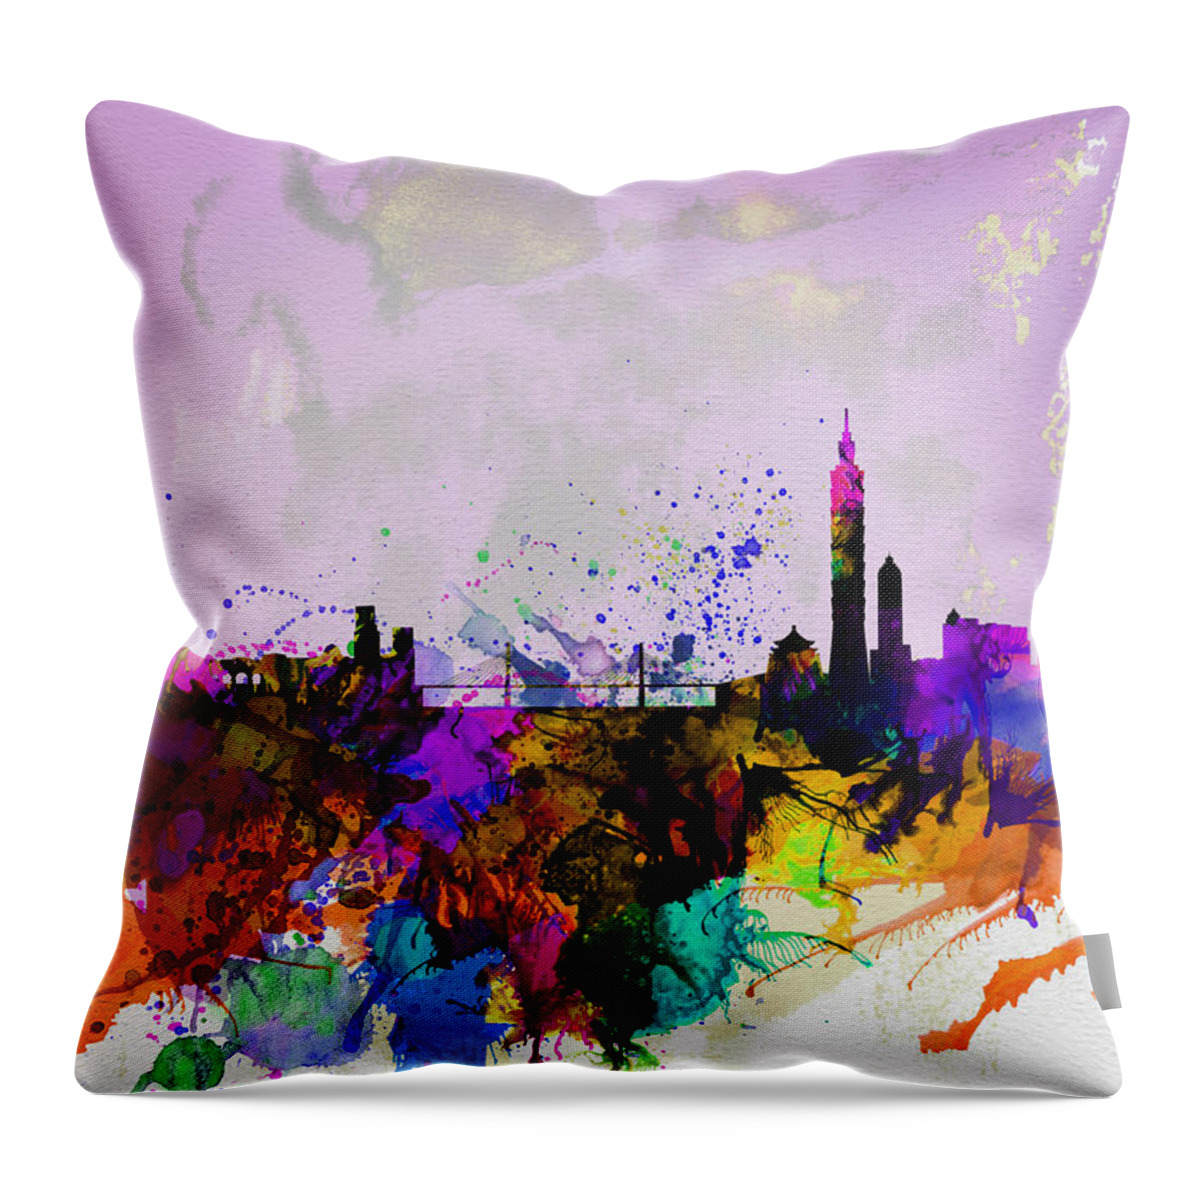  Throw Pillow featuring the painting Taipei Watercolor Skyline by Naxart Studio